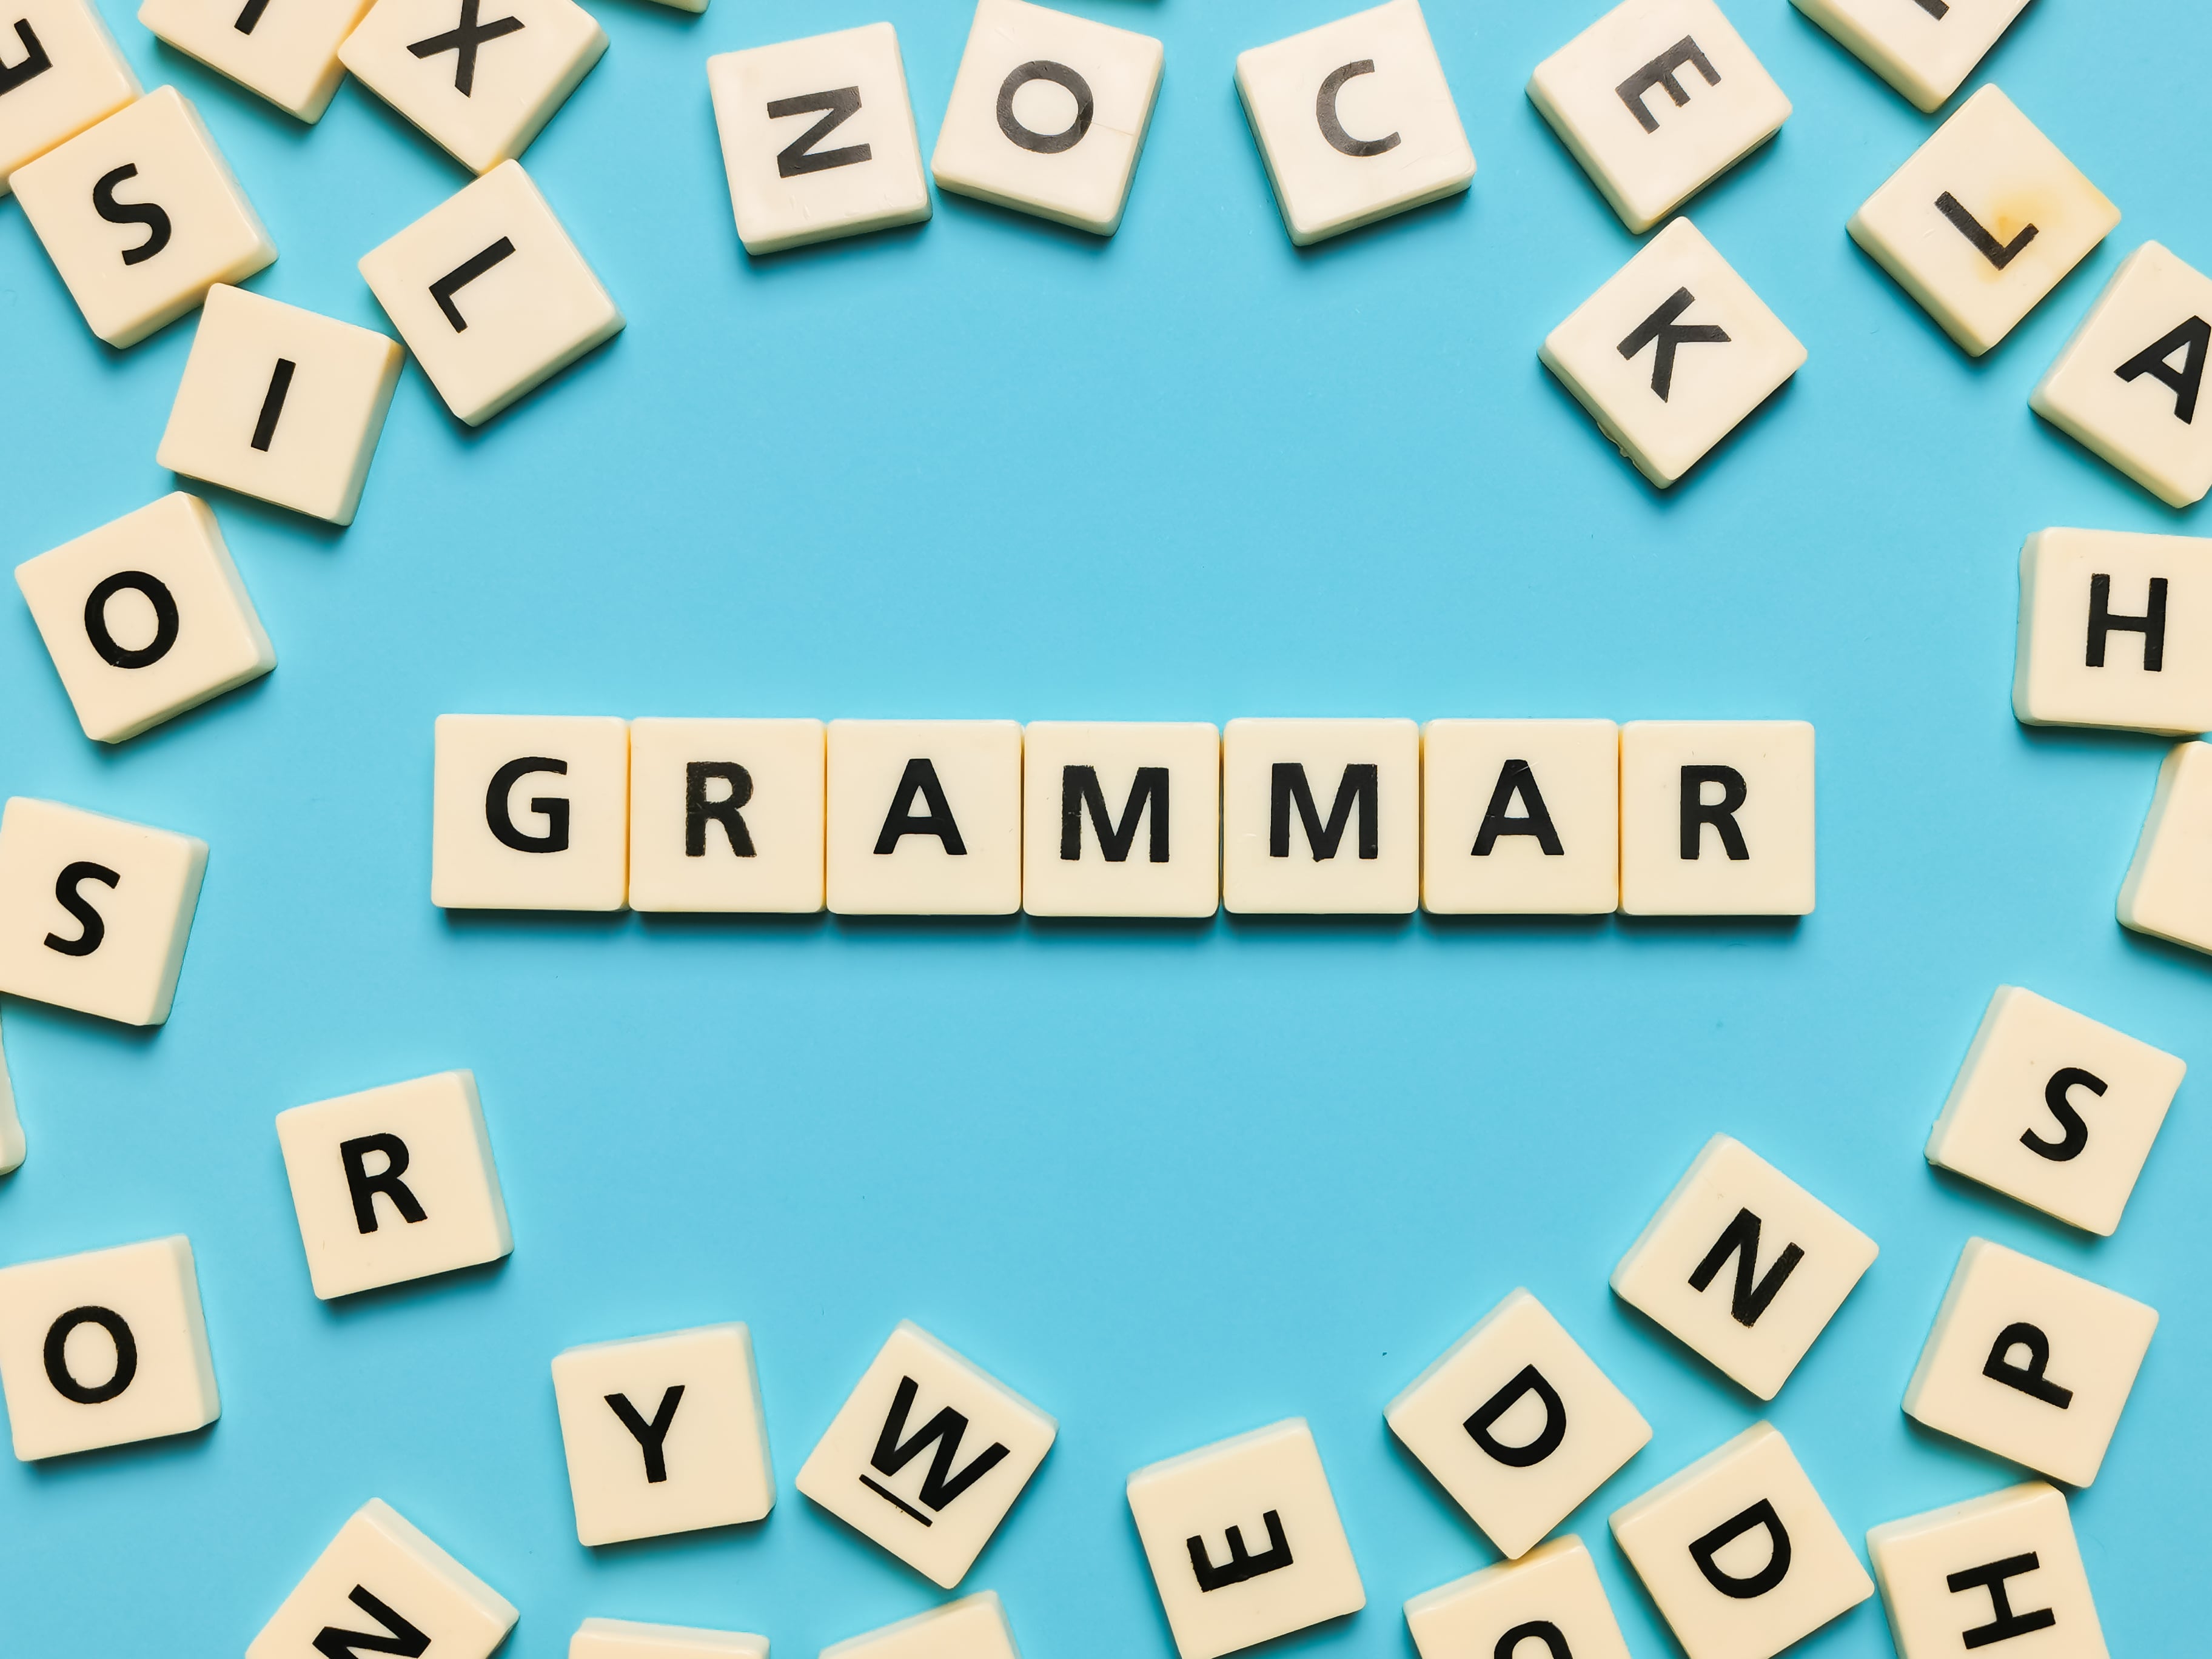 What are the essential elements of English grammar